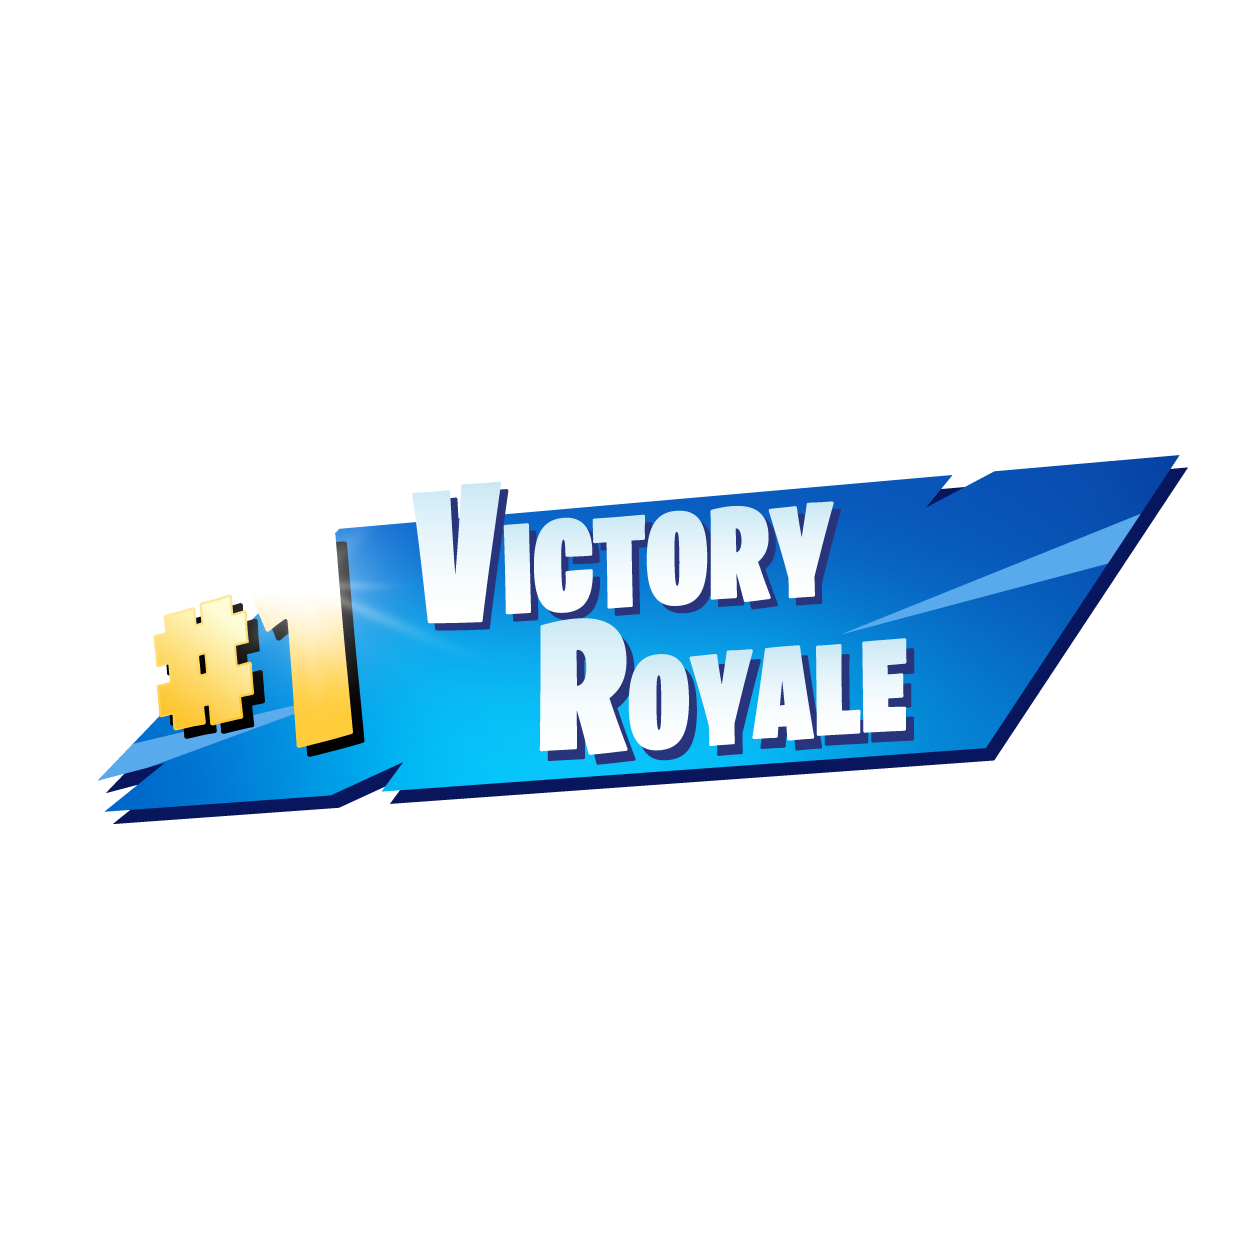 victory royale